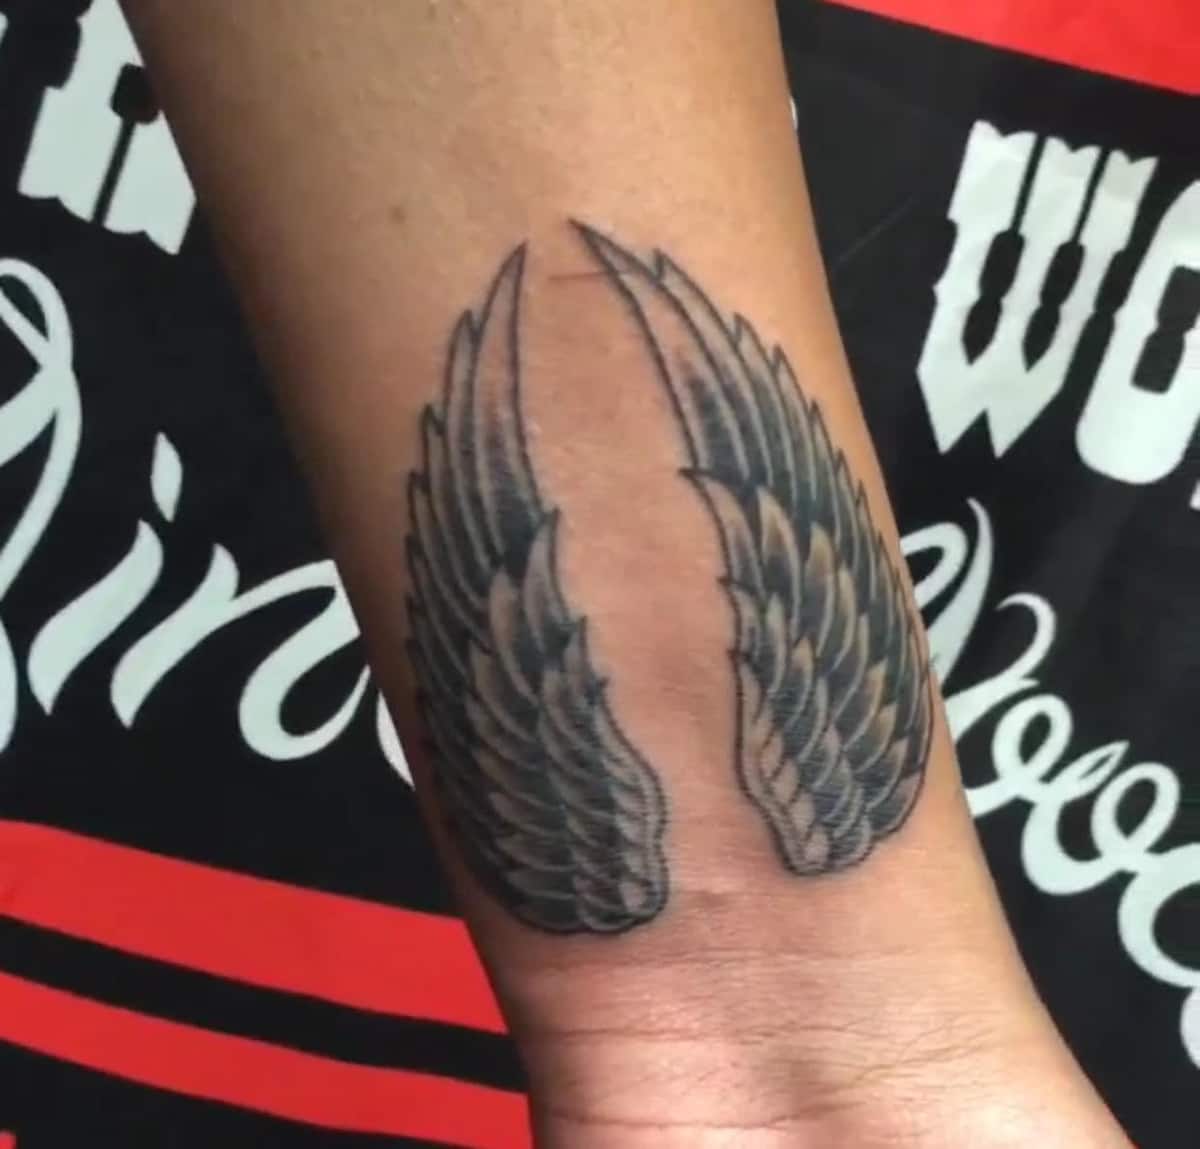 Angel wings done by Adrian at Vince's Nightmare, Miami, Florida. : r/tattoos